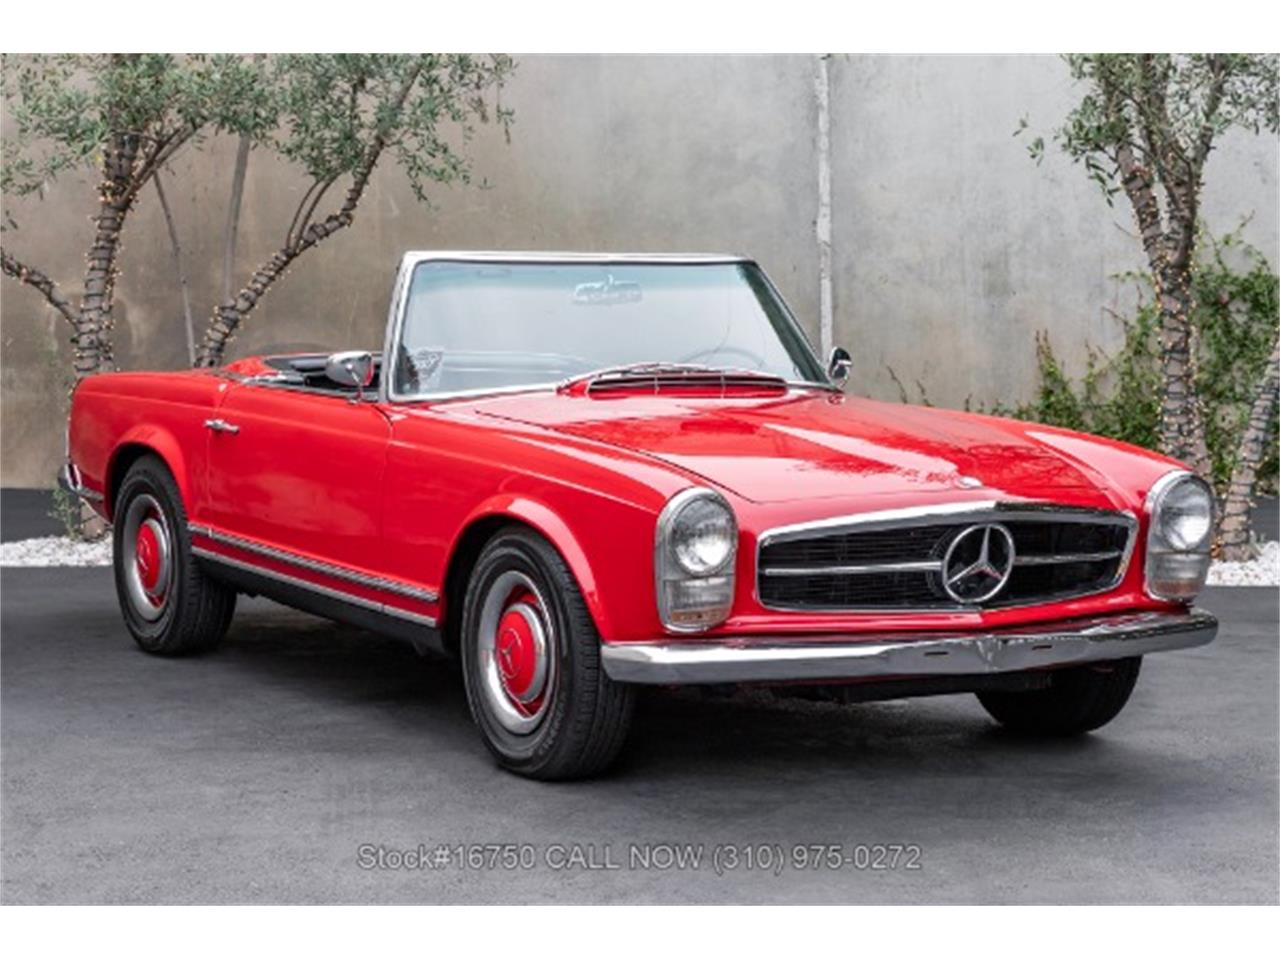 For Sale: 1963 Mercedes-Benz 230SL in Beverly Hills, California for sale in Beverly Hills, CA